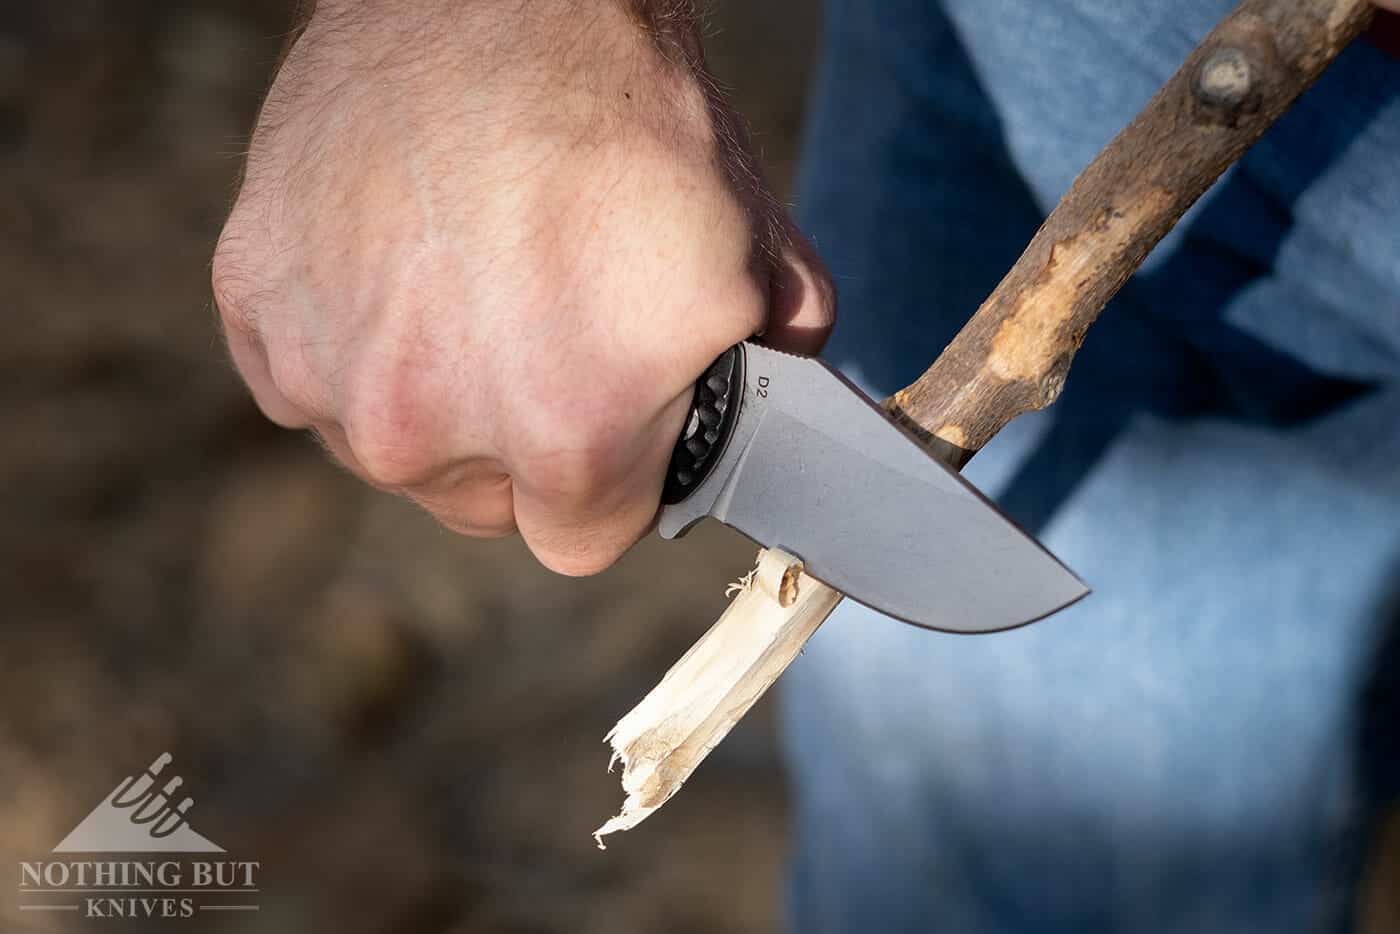 Sharpening a stick with the Off-Grid Badger folding knife.